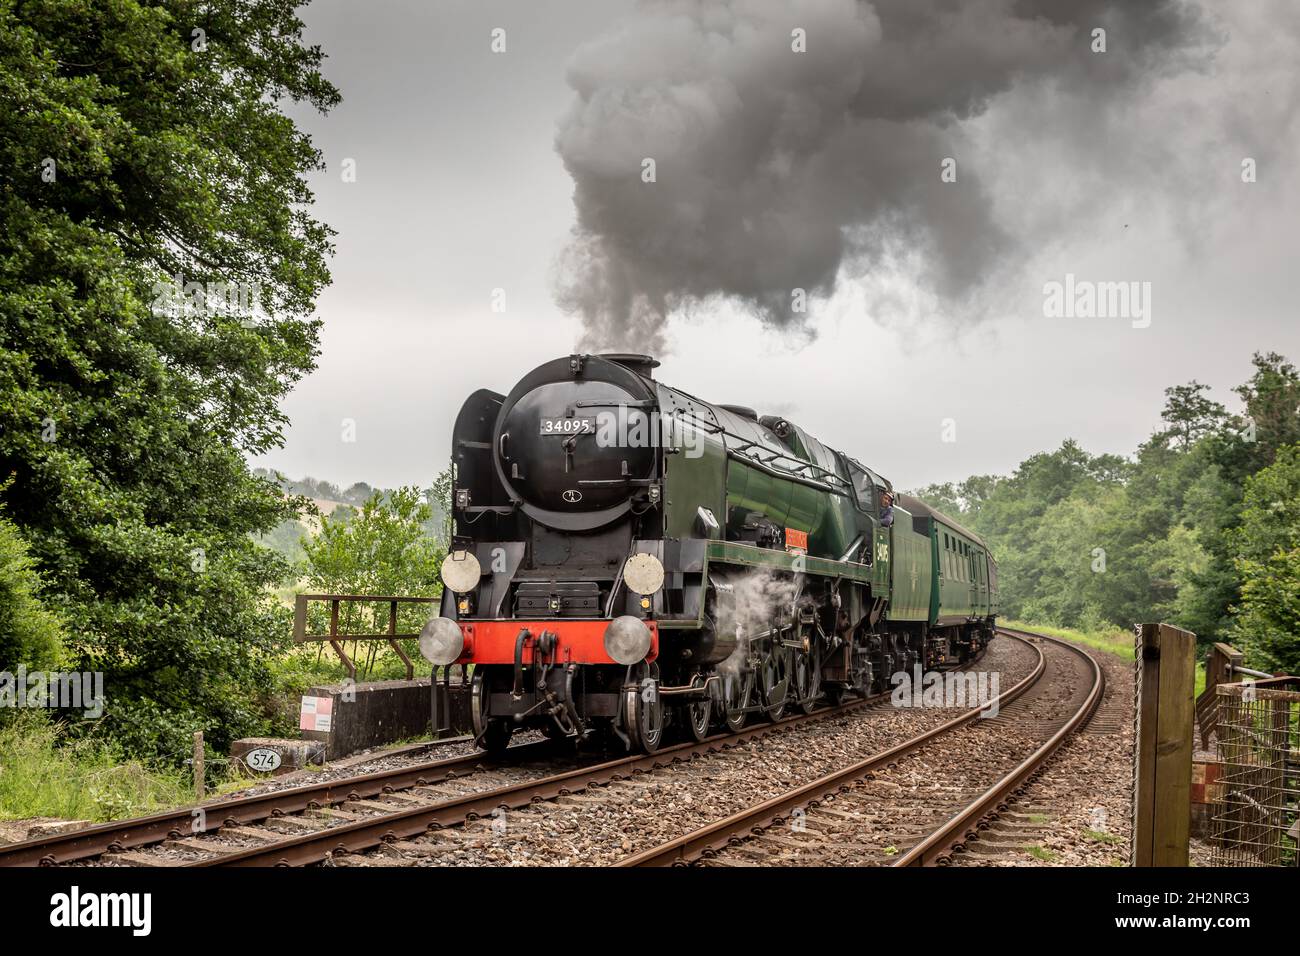 BR BoB class 4-6-2 No. 34053 'Sir Keith Park' (running as 34095 'Brentor') departs from Eridge on the Spa Valley Railway Stock Photo